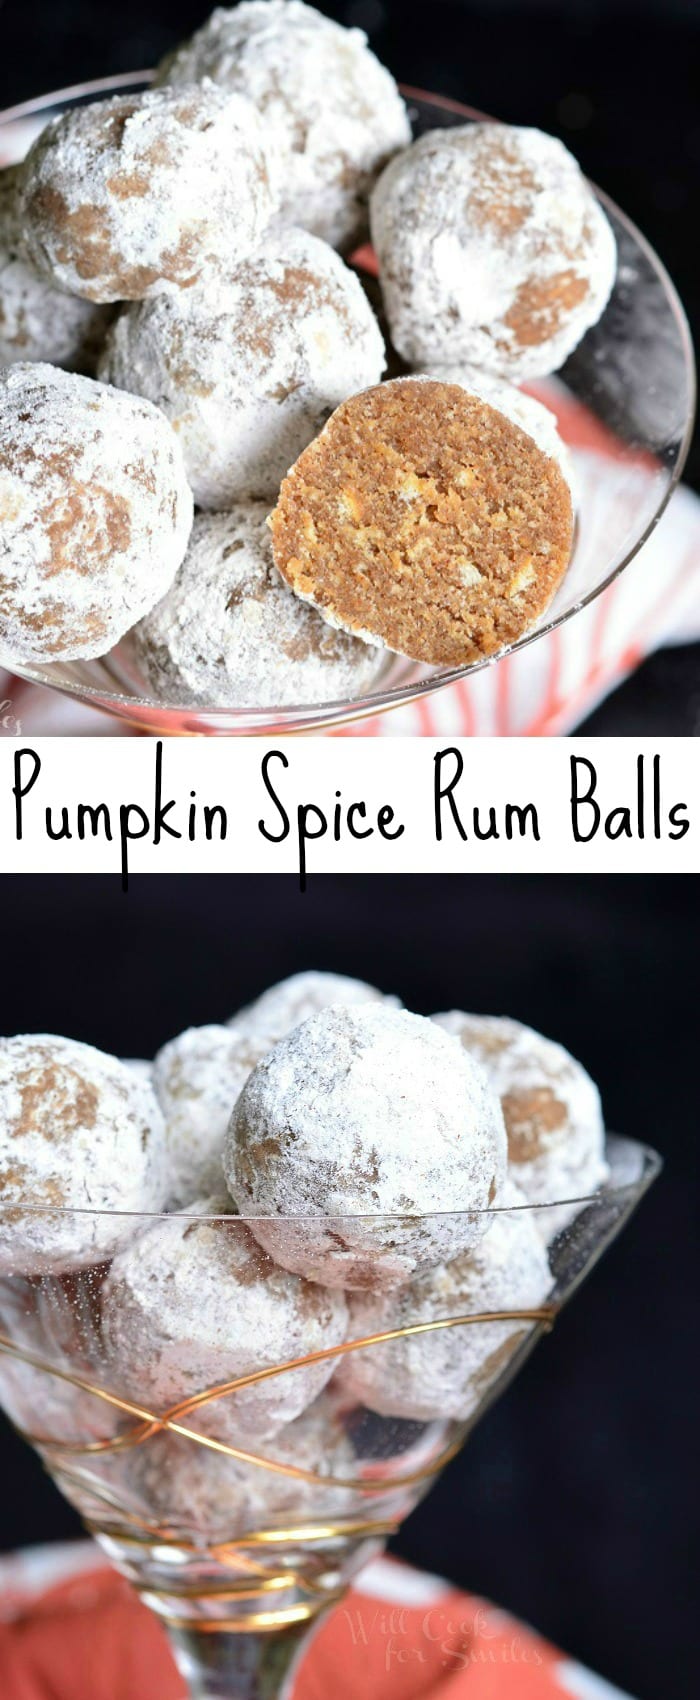 Pumpkin Spice Rum Balls with powder sugar on the outside of them in a champagne glass photo collage